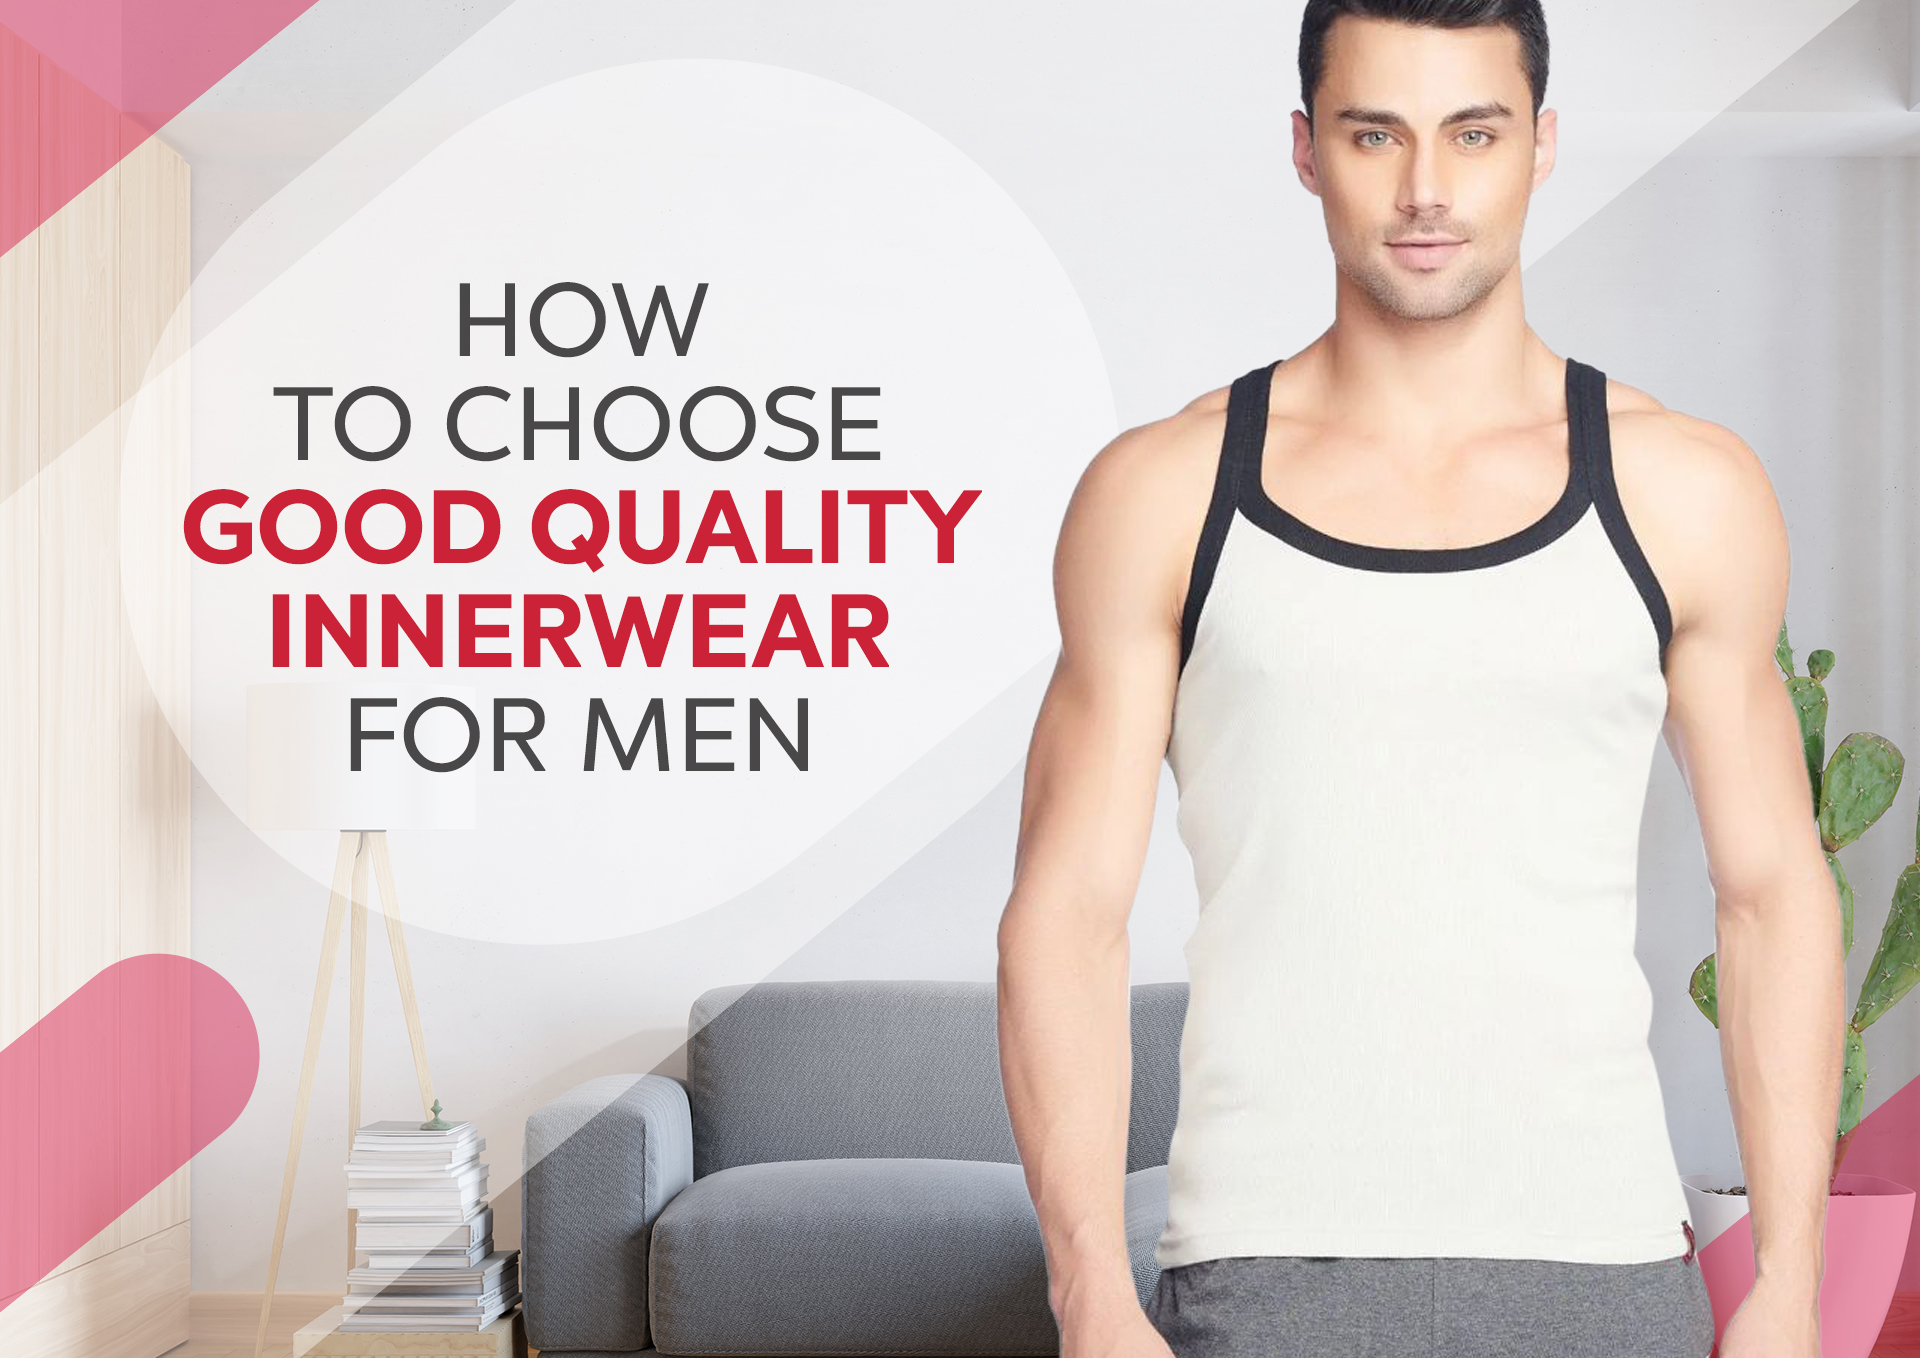 How To Choose Good Quality Innerwear for Men